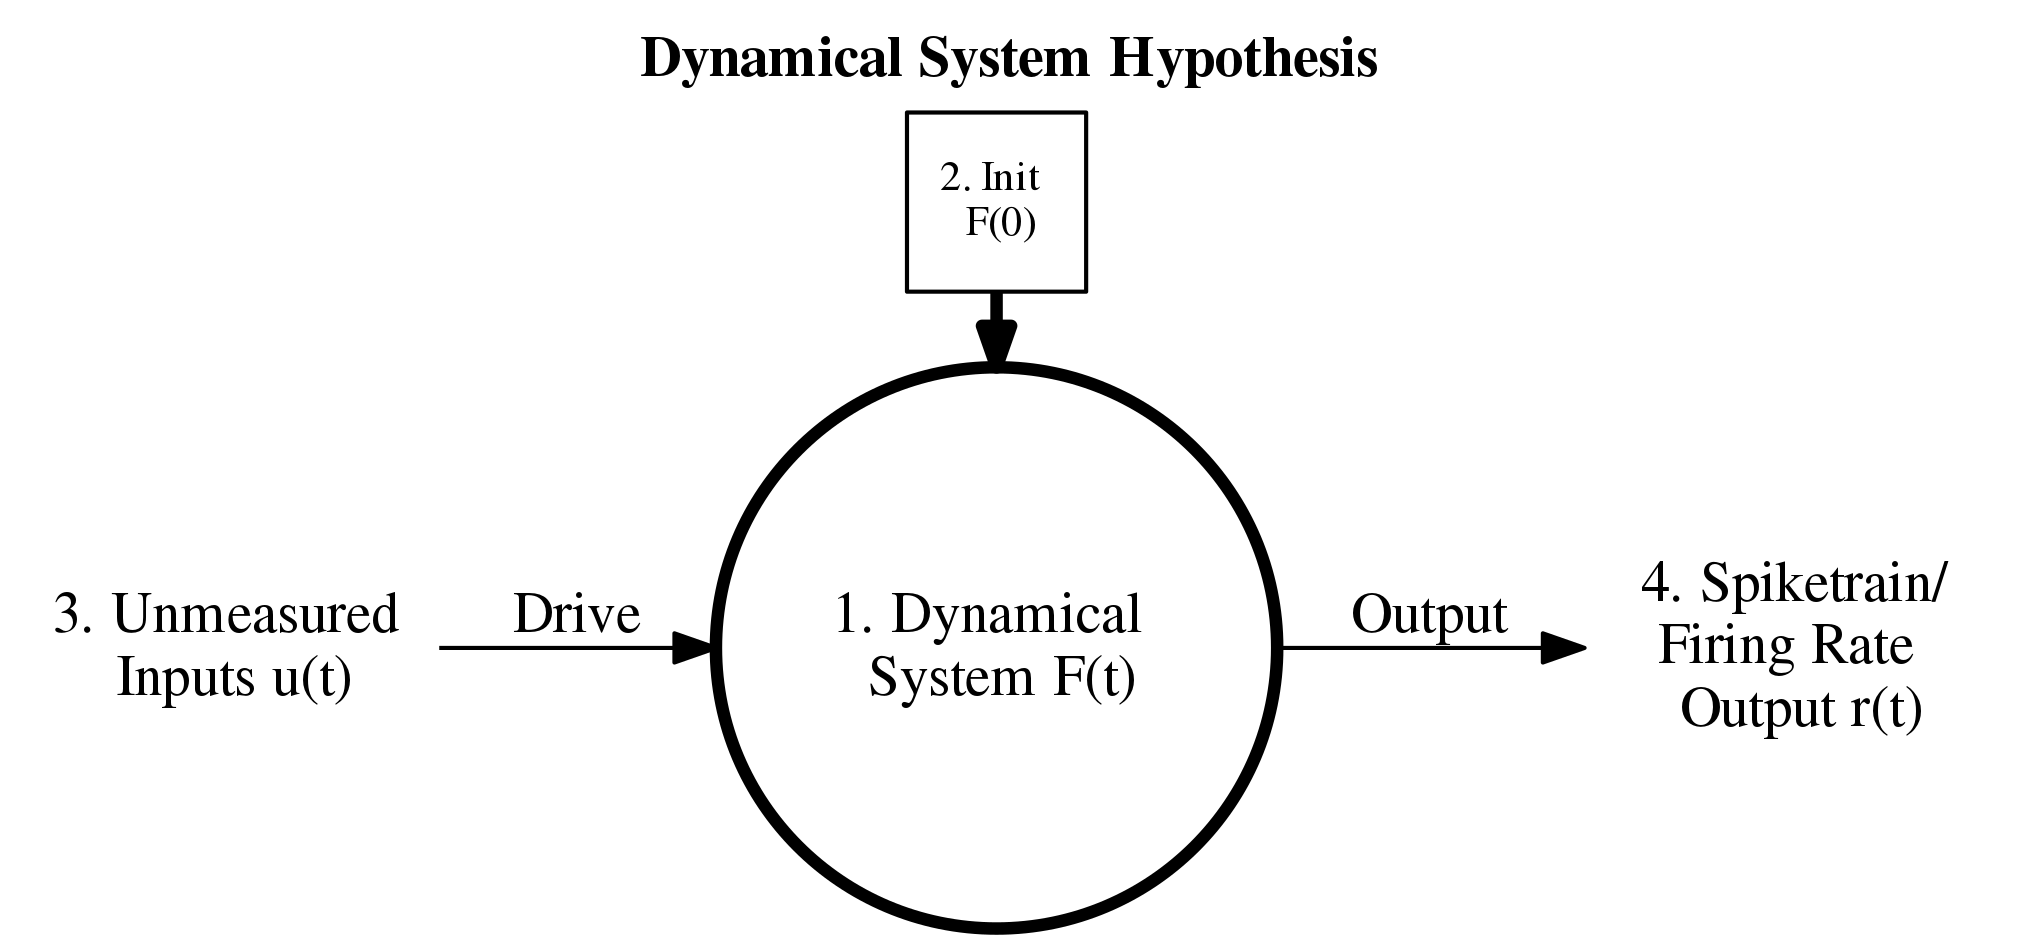 Dynamical System Hypothesis